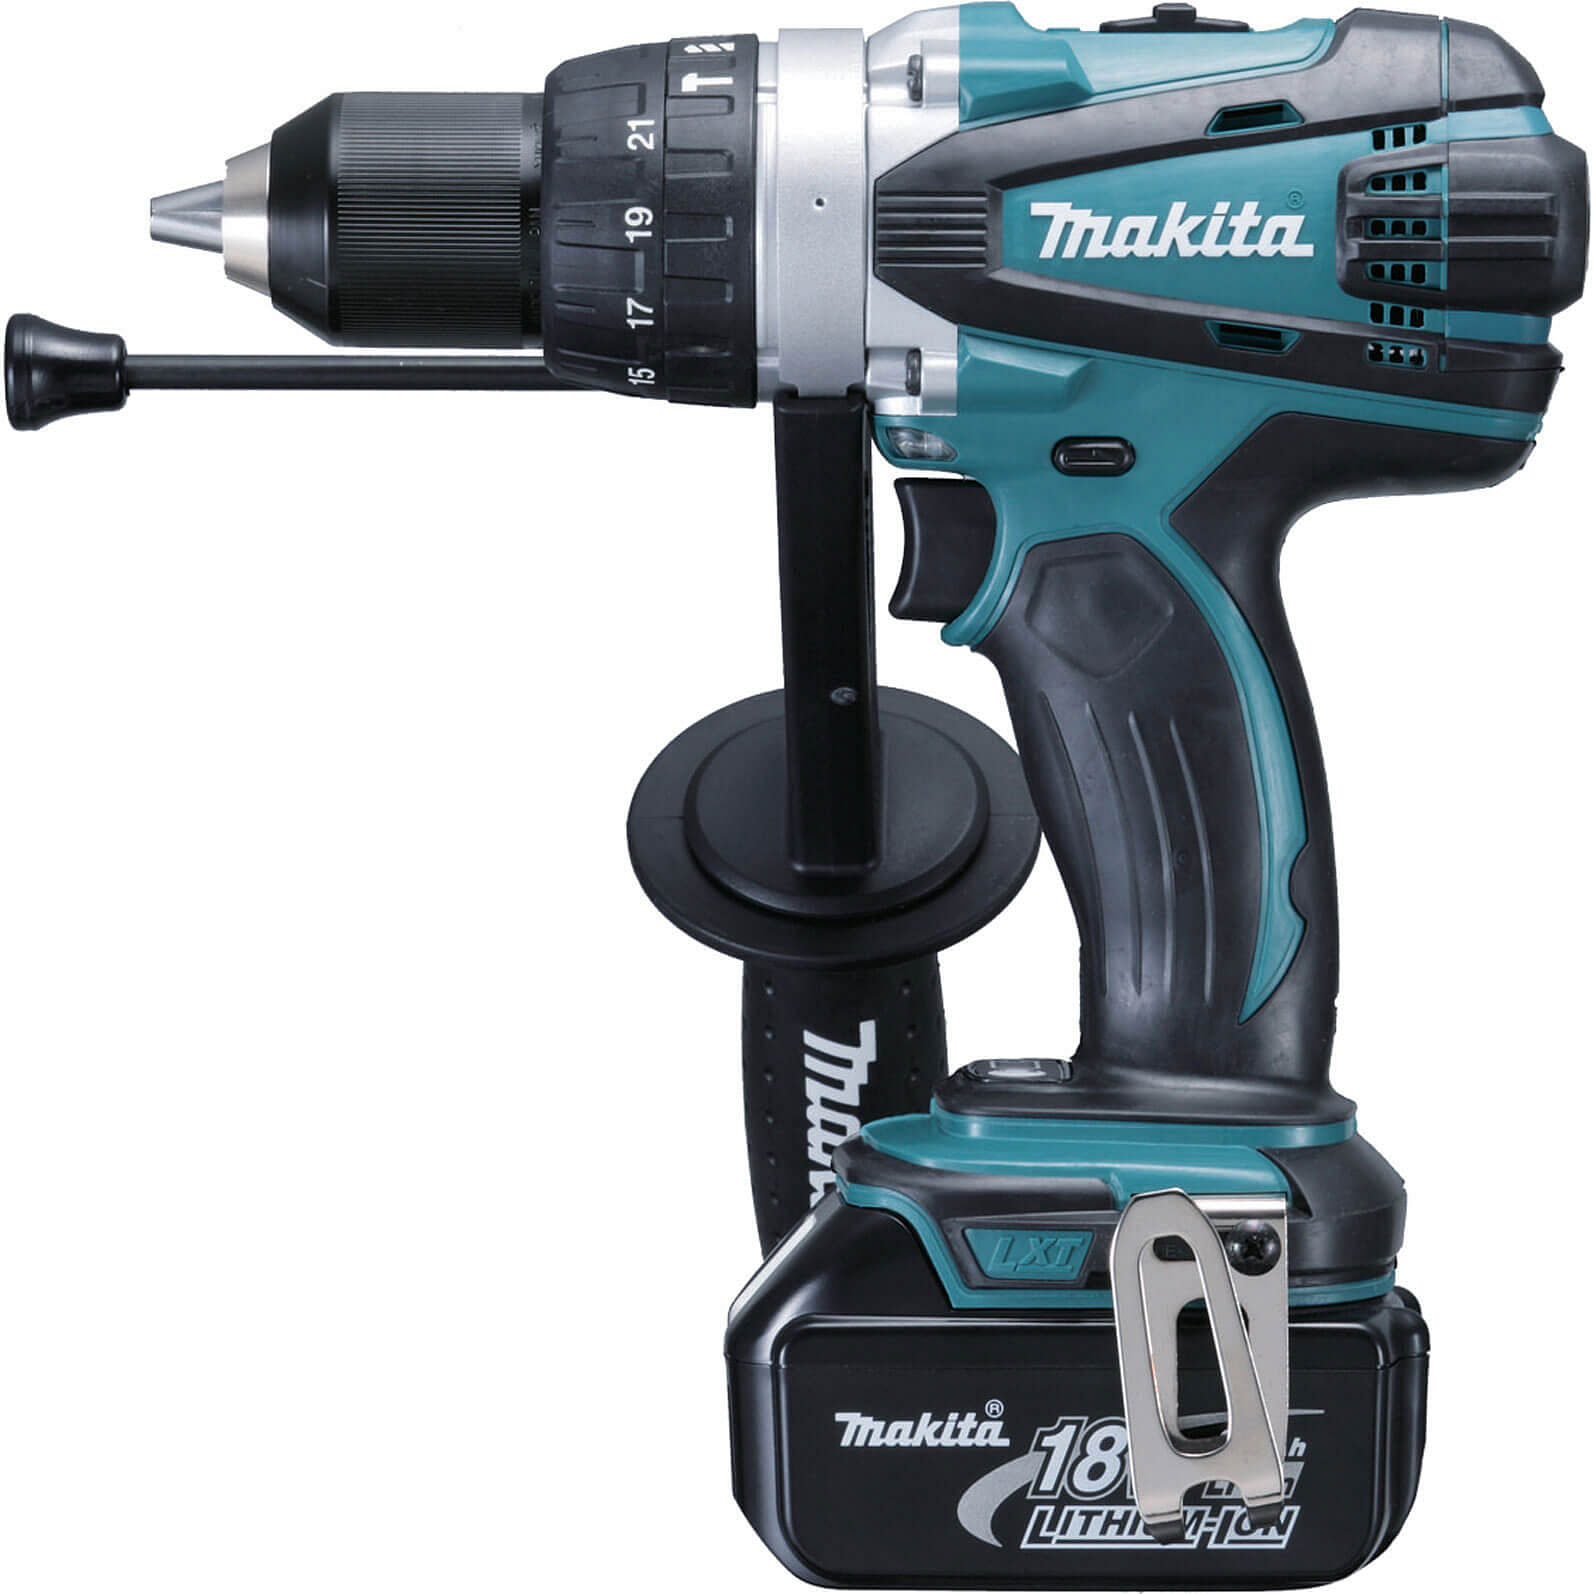 SKIN ~ GOOD CONDITION Details about   MAKITA DHP458 XLT CORDLESS HAMMER DRILL 